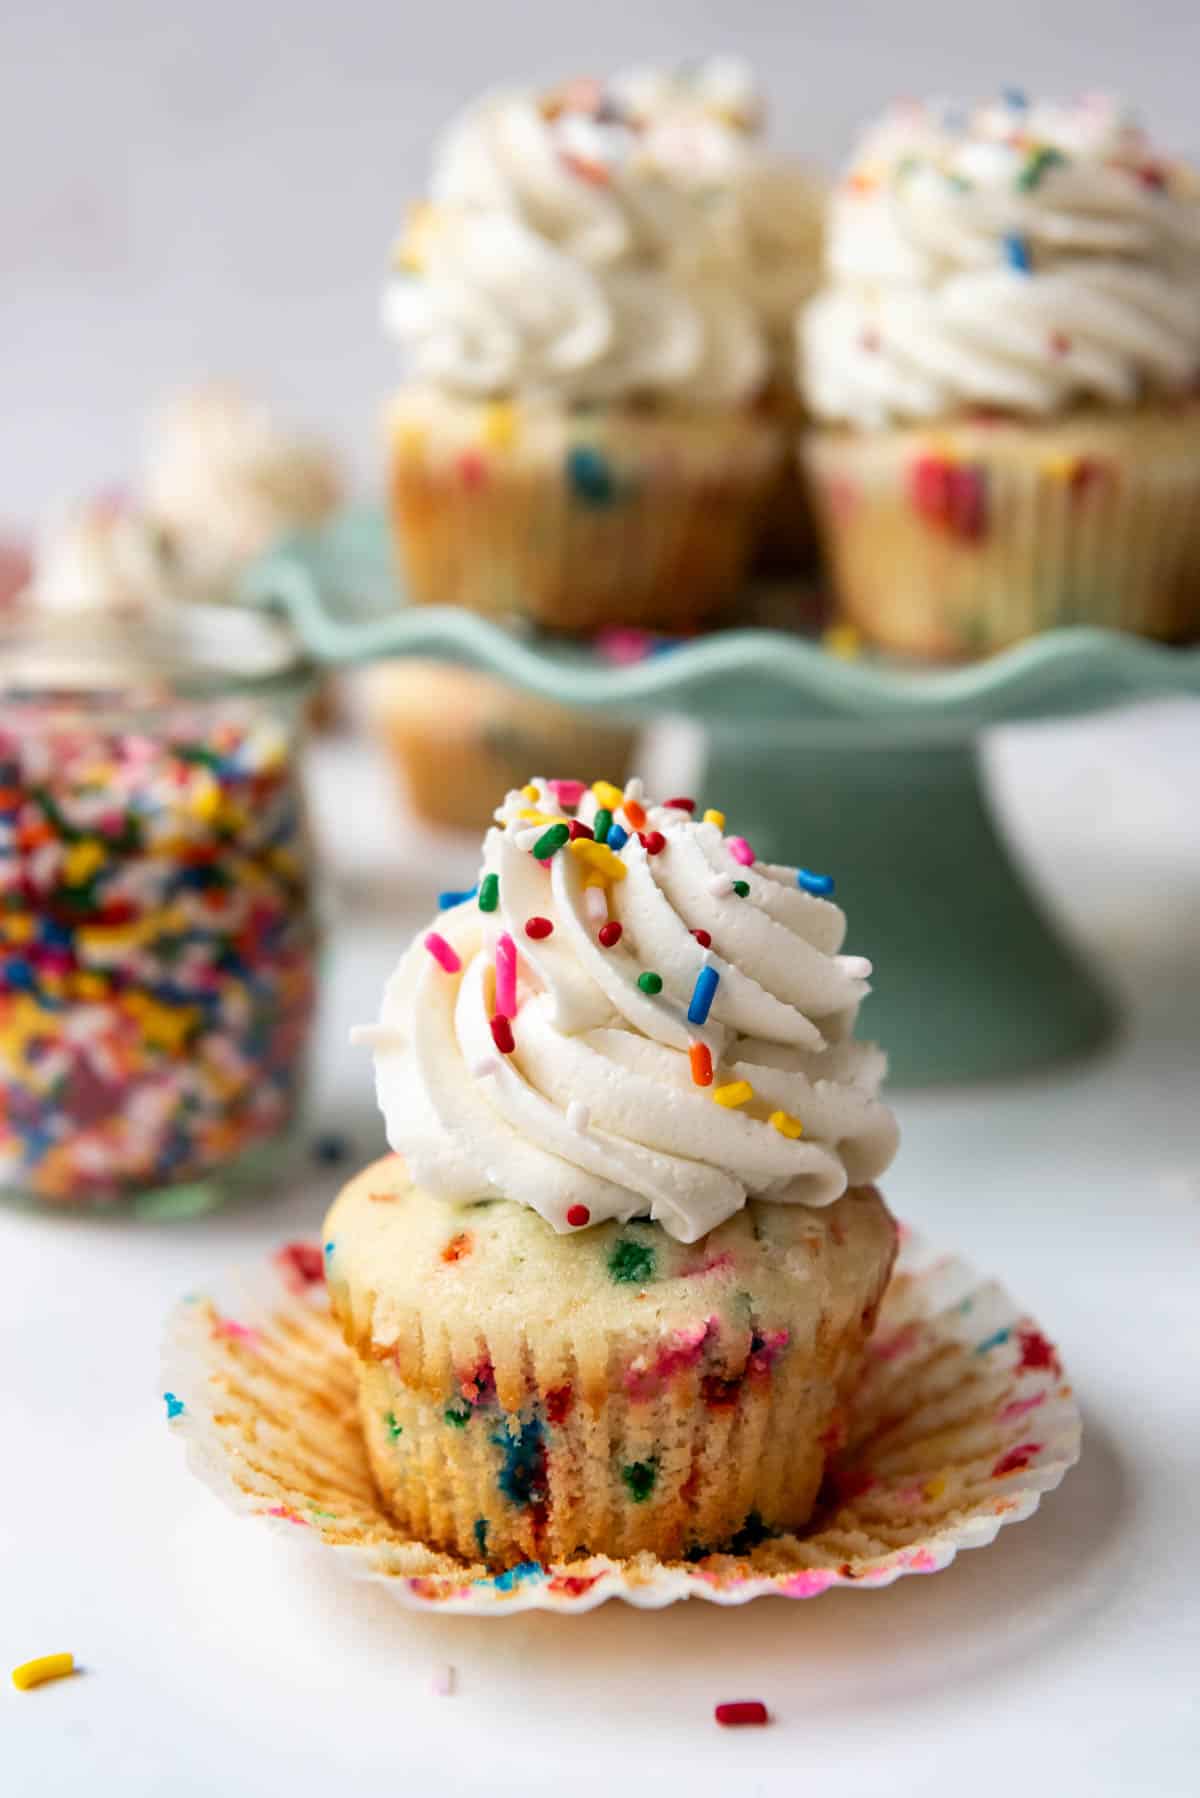 A frosted funfetti cupcake with sprinkles on top in front of more cupcakes on a pale green cake stand.